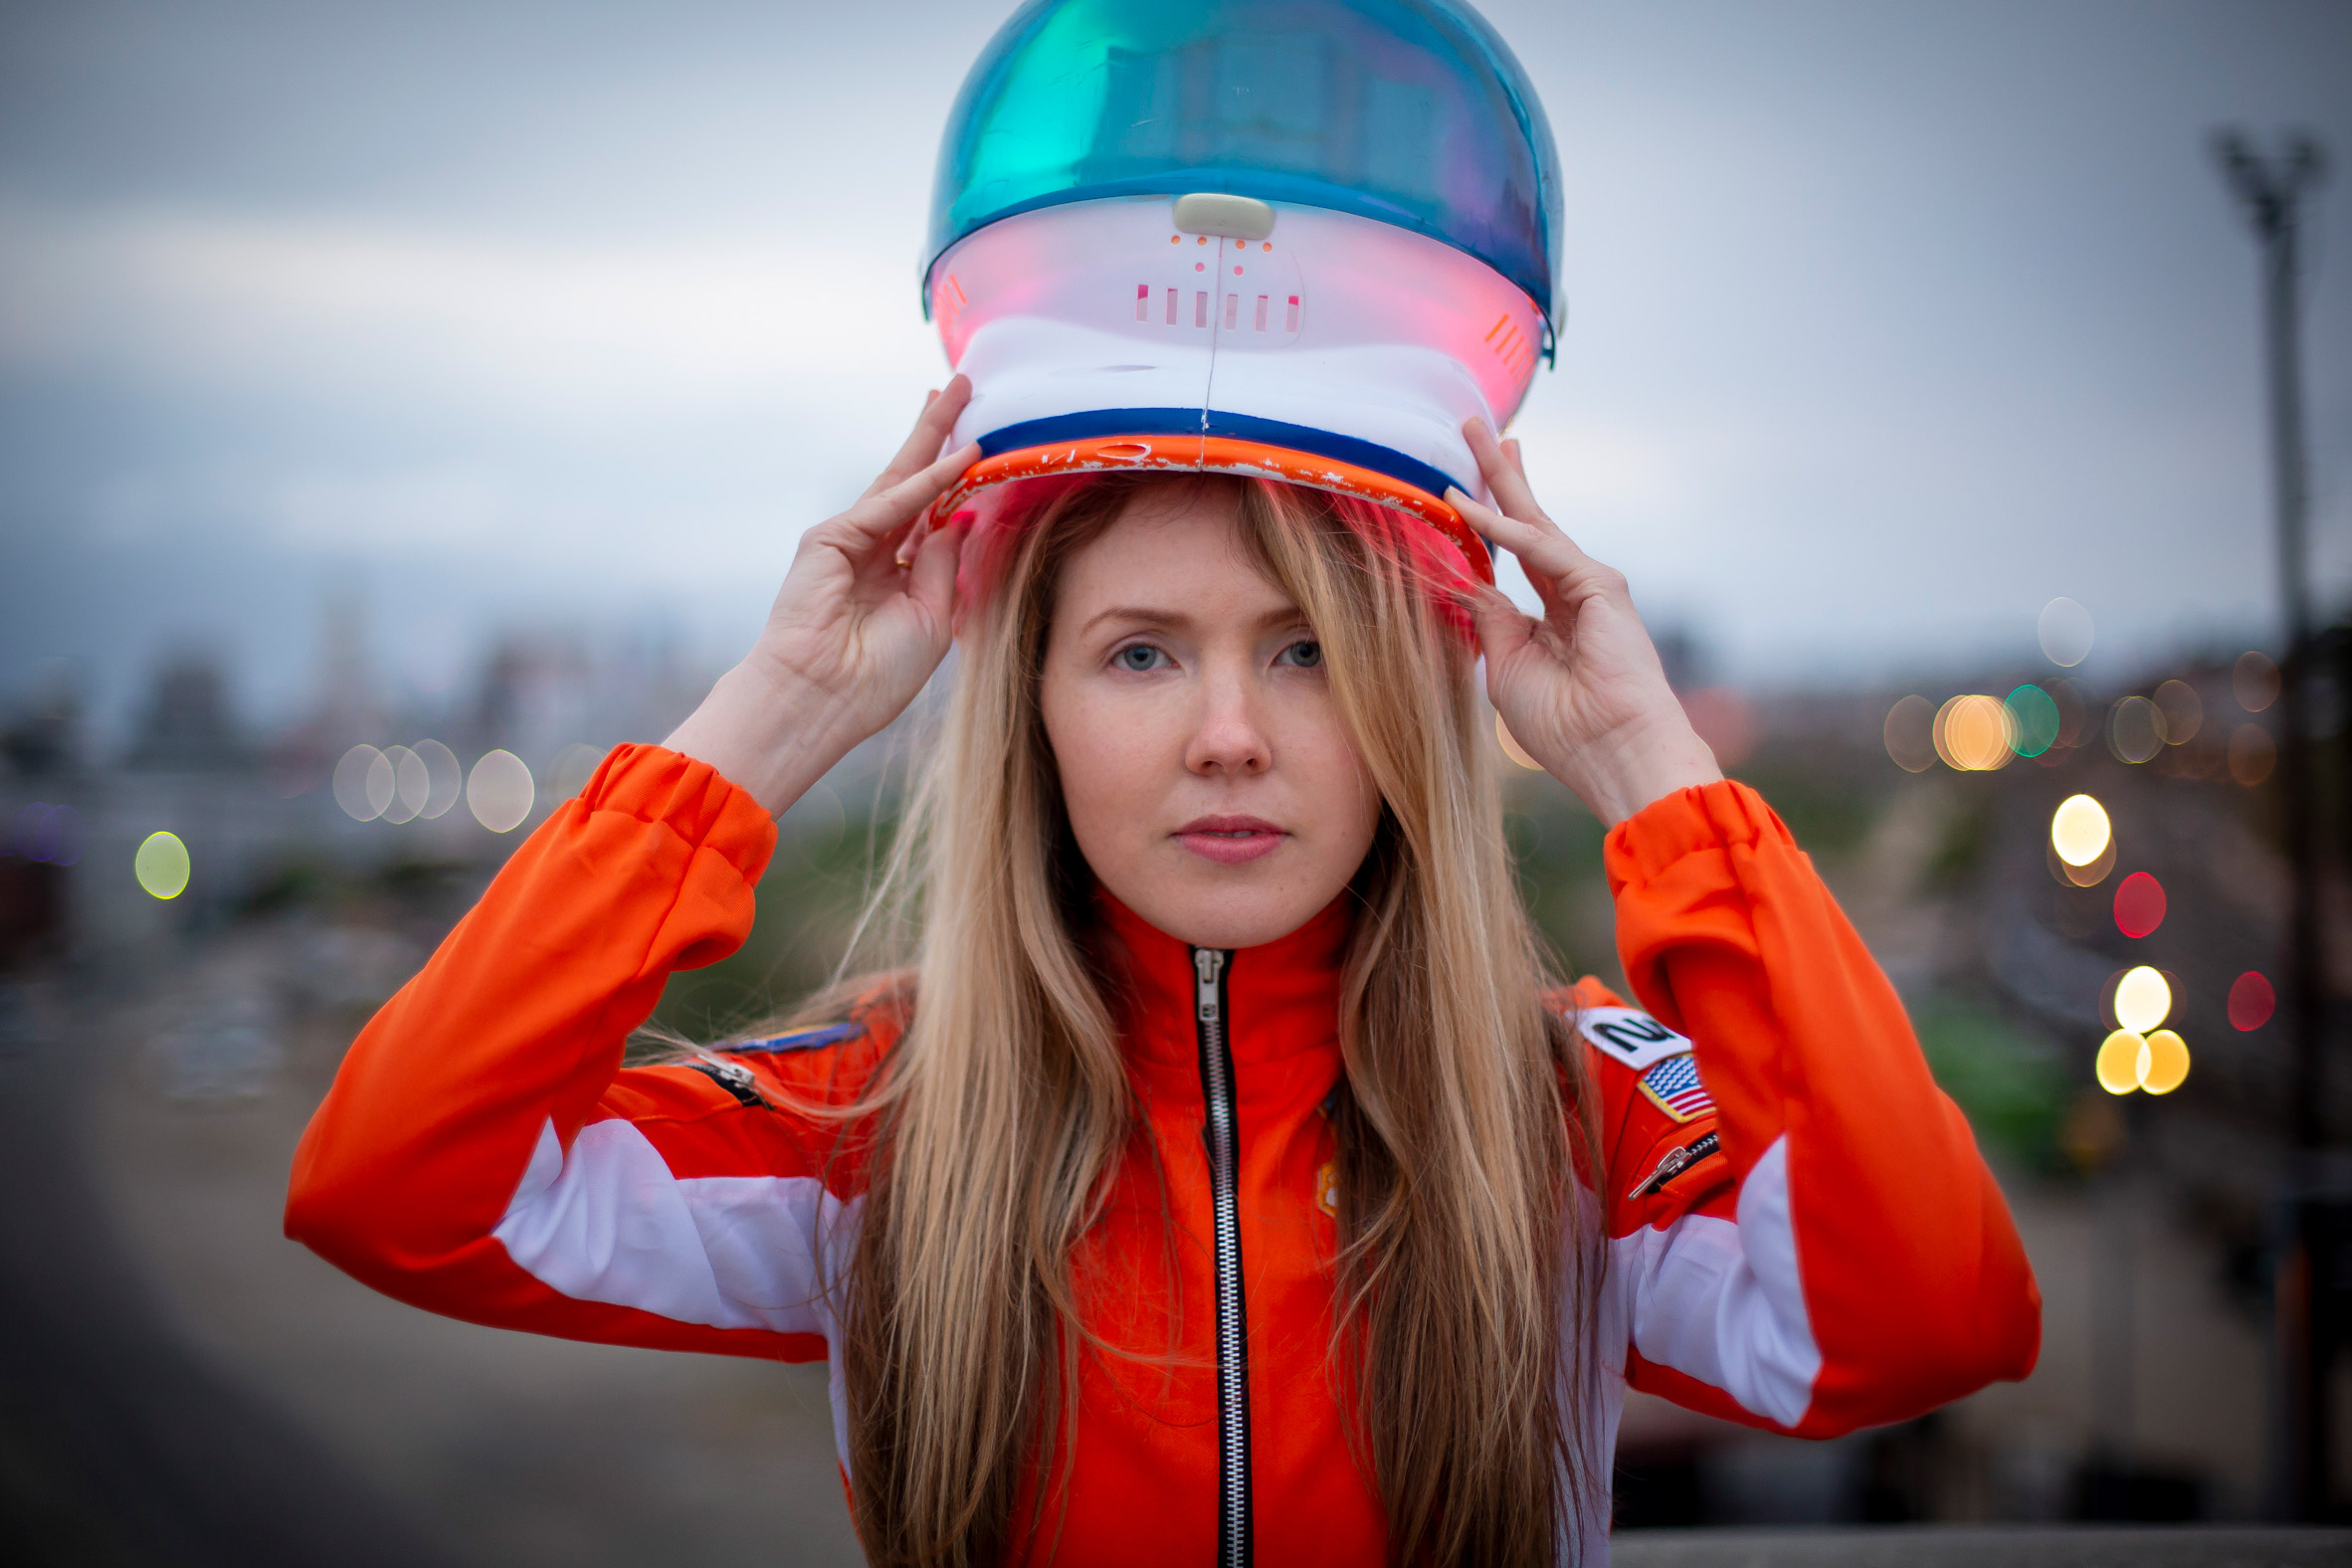 Beatie Wolfe is the subject of documentary Orange Juice for the Ears: from Space Beams to Anti-Streams